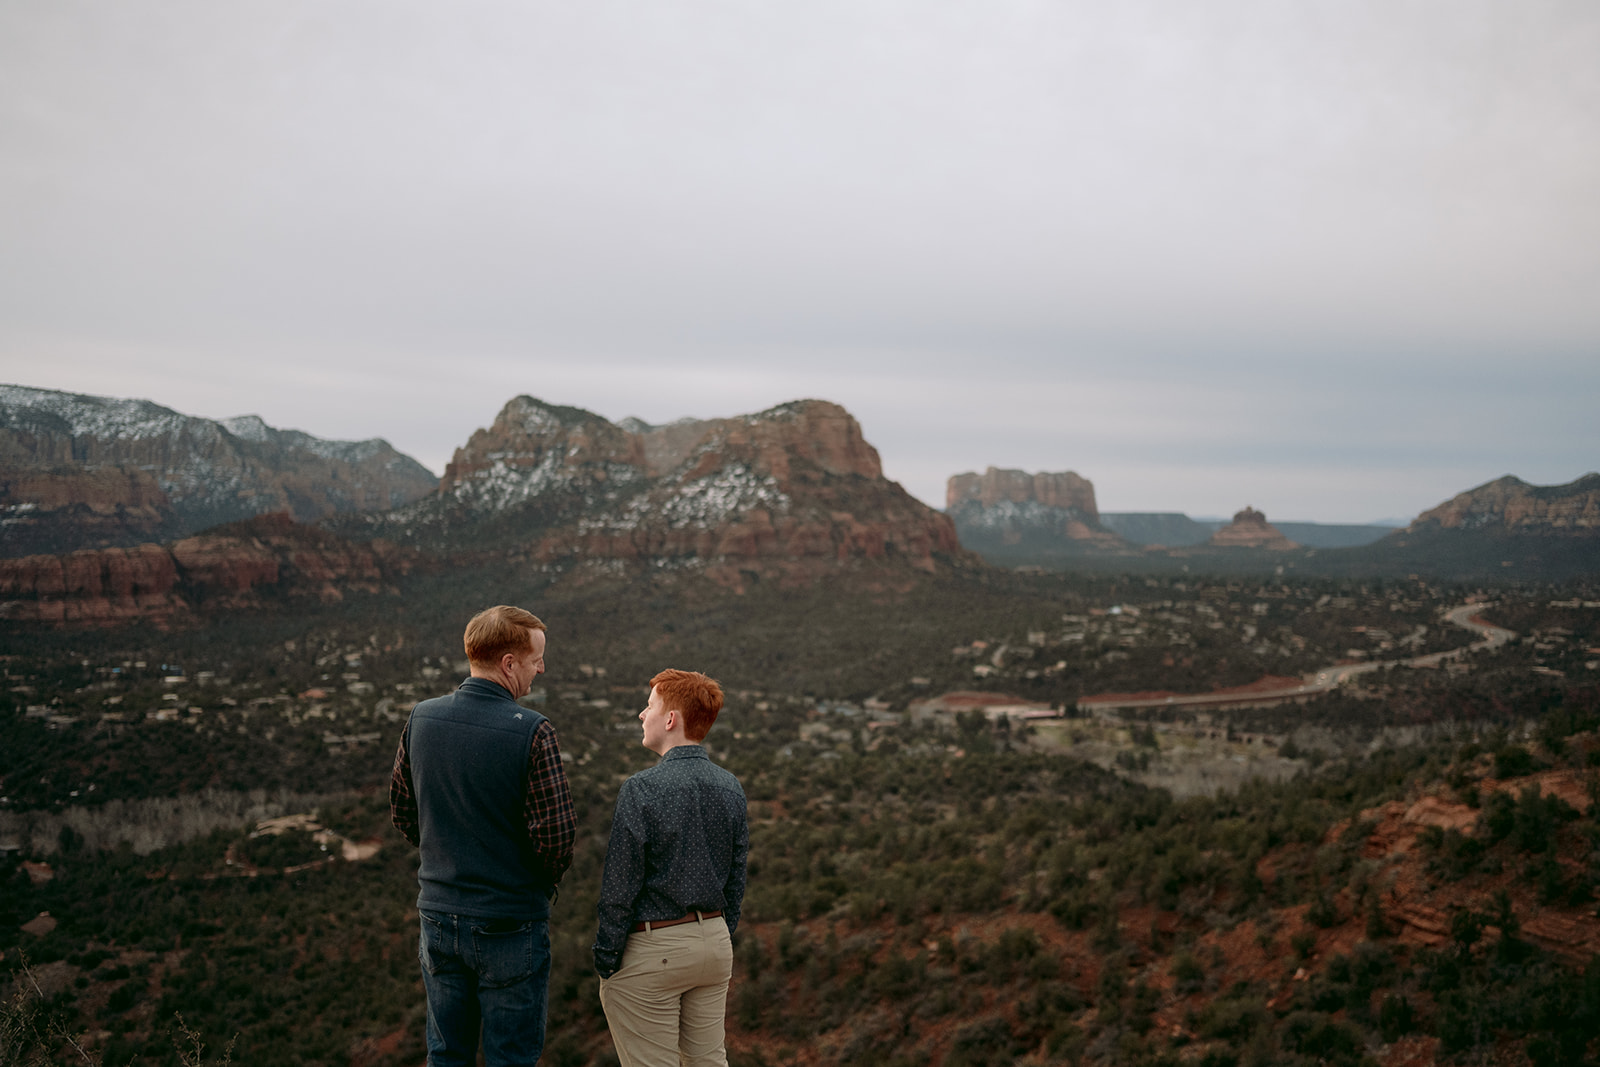 father and son looking out at the Sedona view